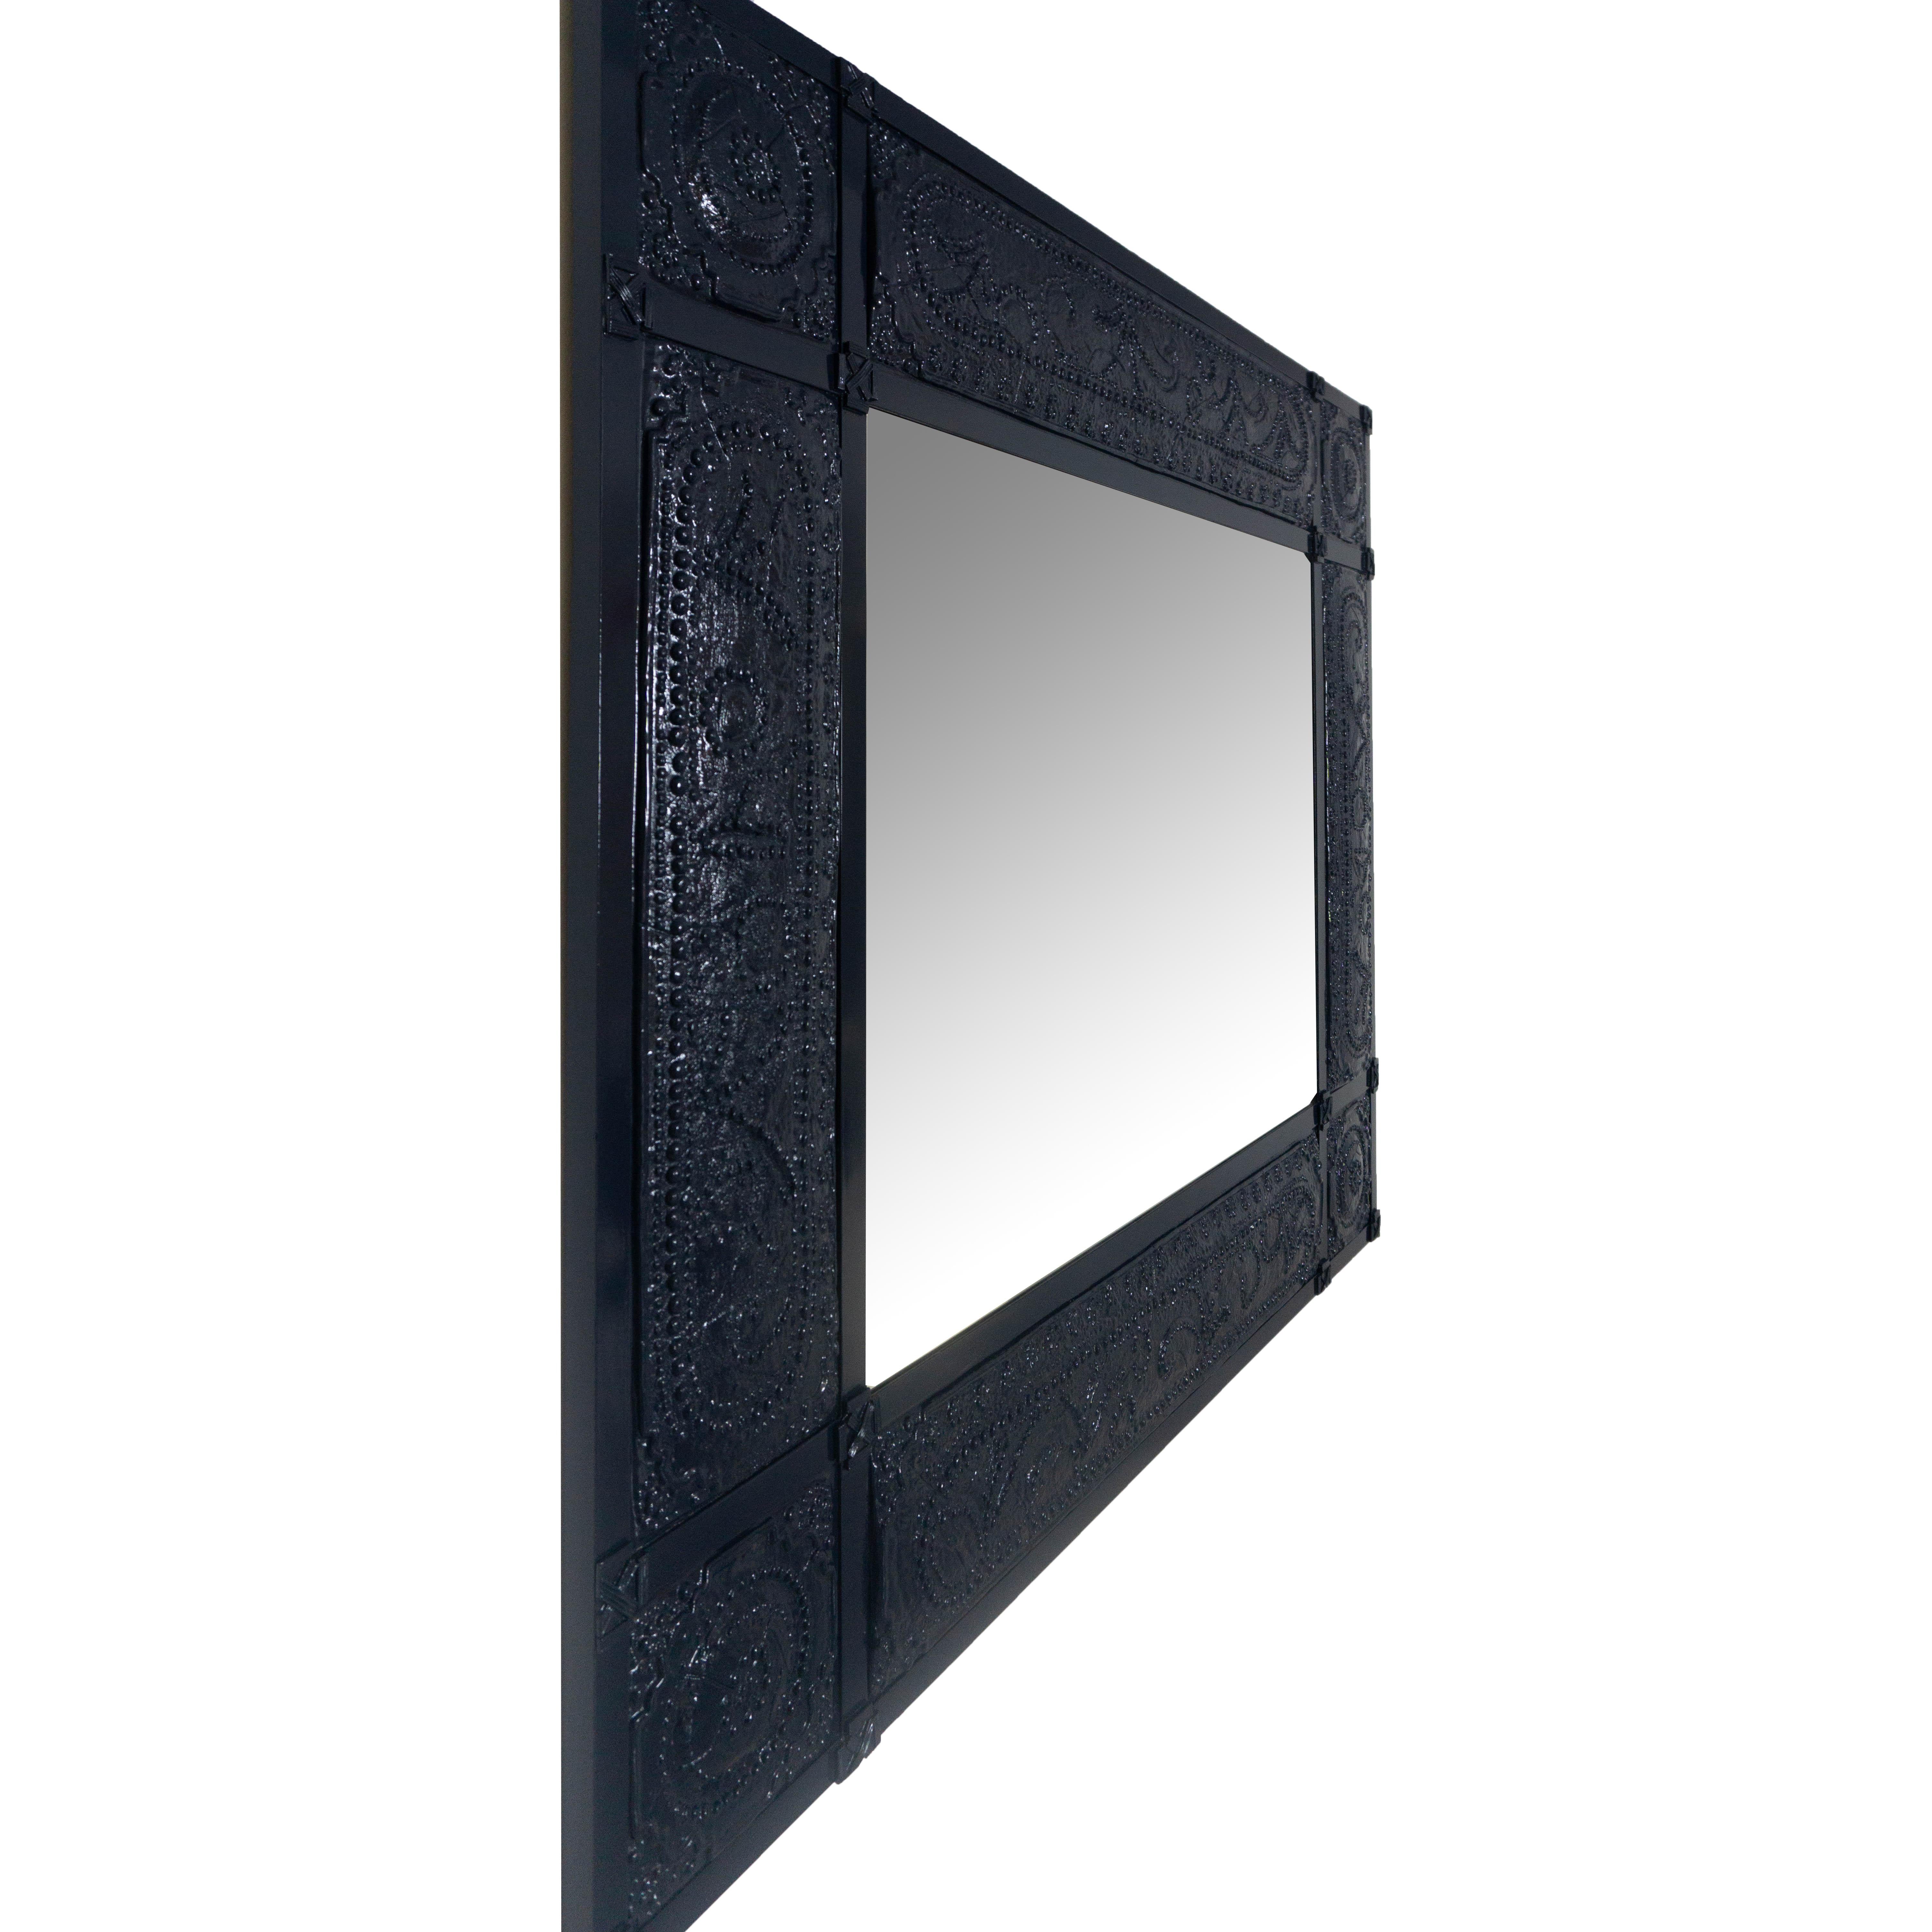 A one of a kind antique Victorian wall mirror lacquered in a high gloss deep royal blue. This large wall mirror features ornate detailed carvings. 

Measurements: 50